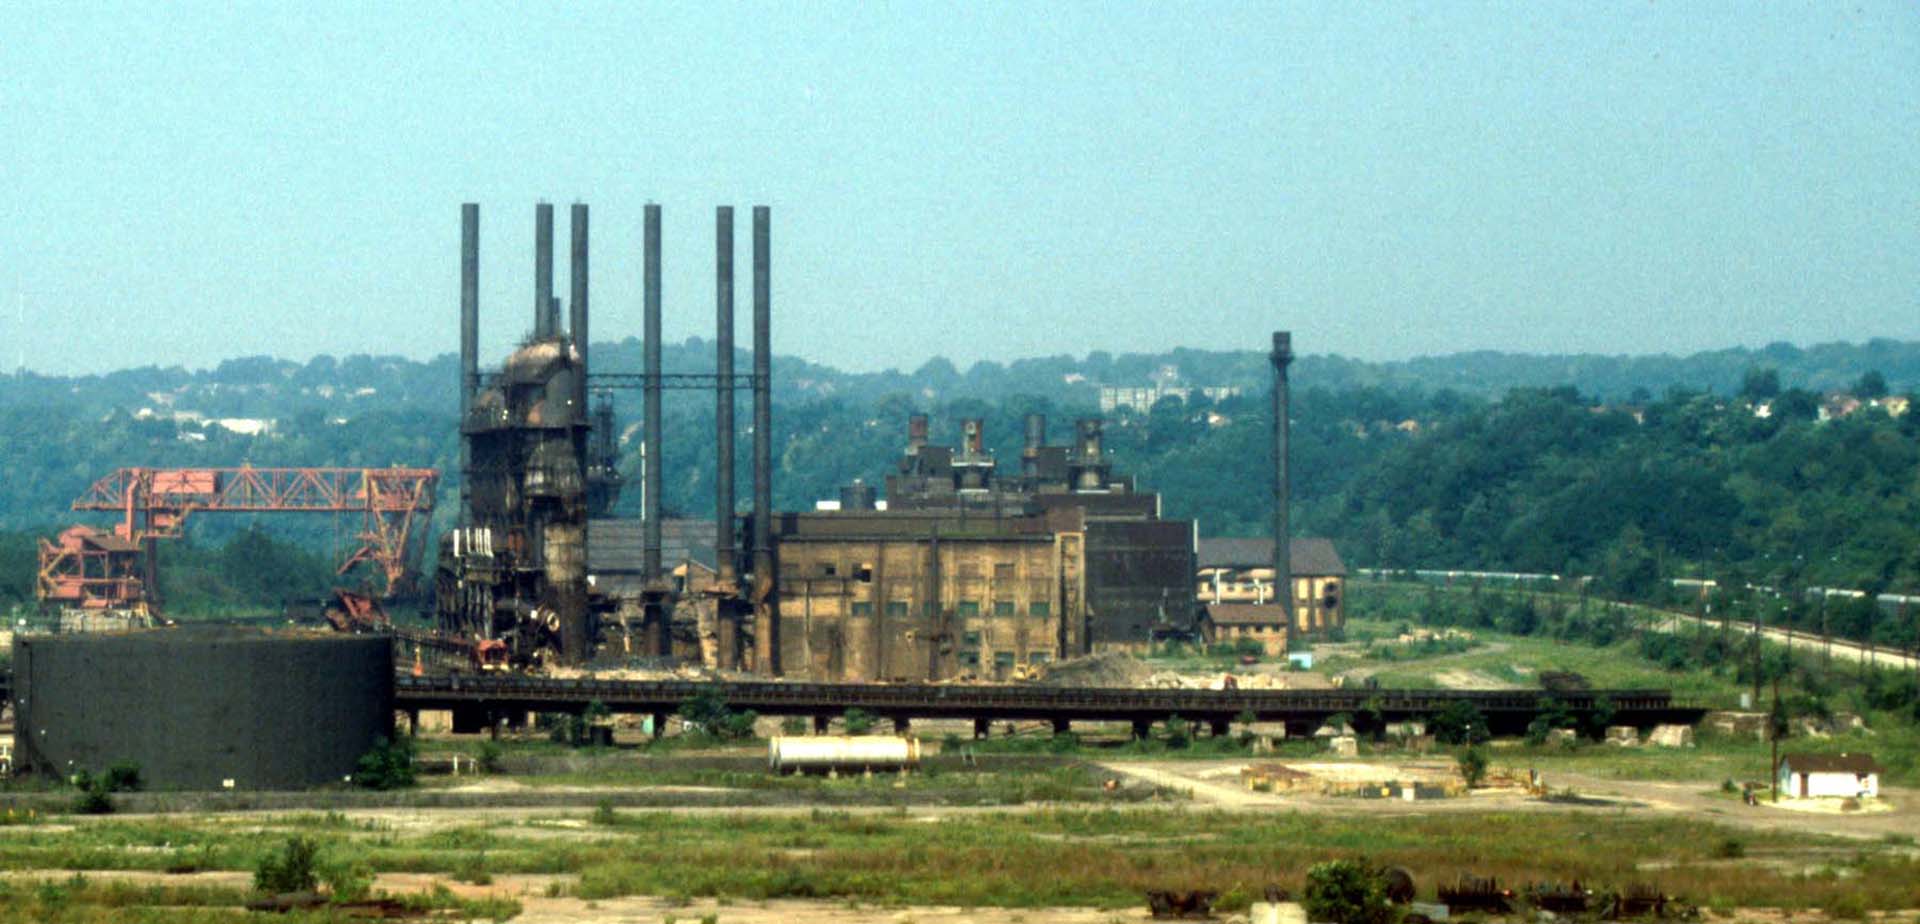 The Carrie Blast Furnaces in 1988